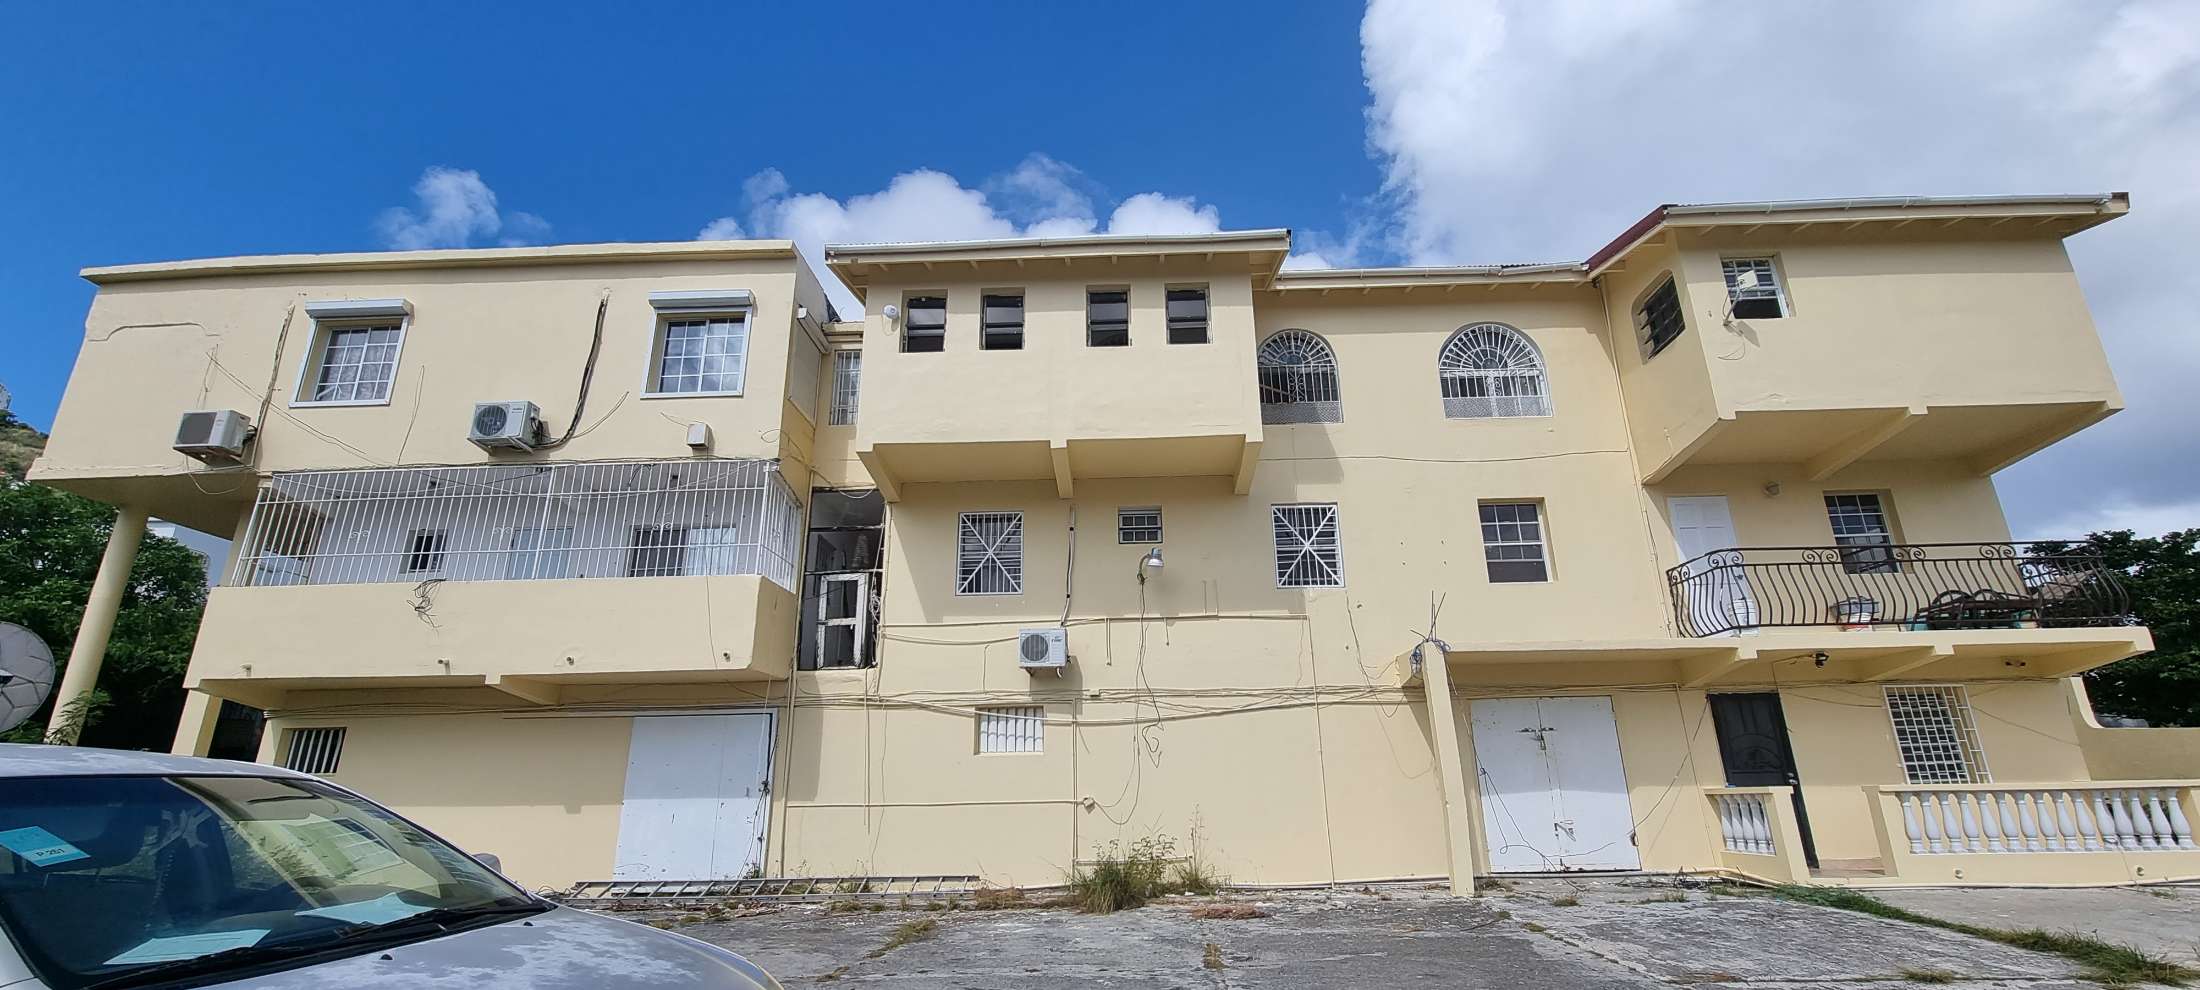 Cay Hill Apartment Building For Sale